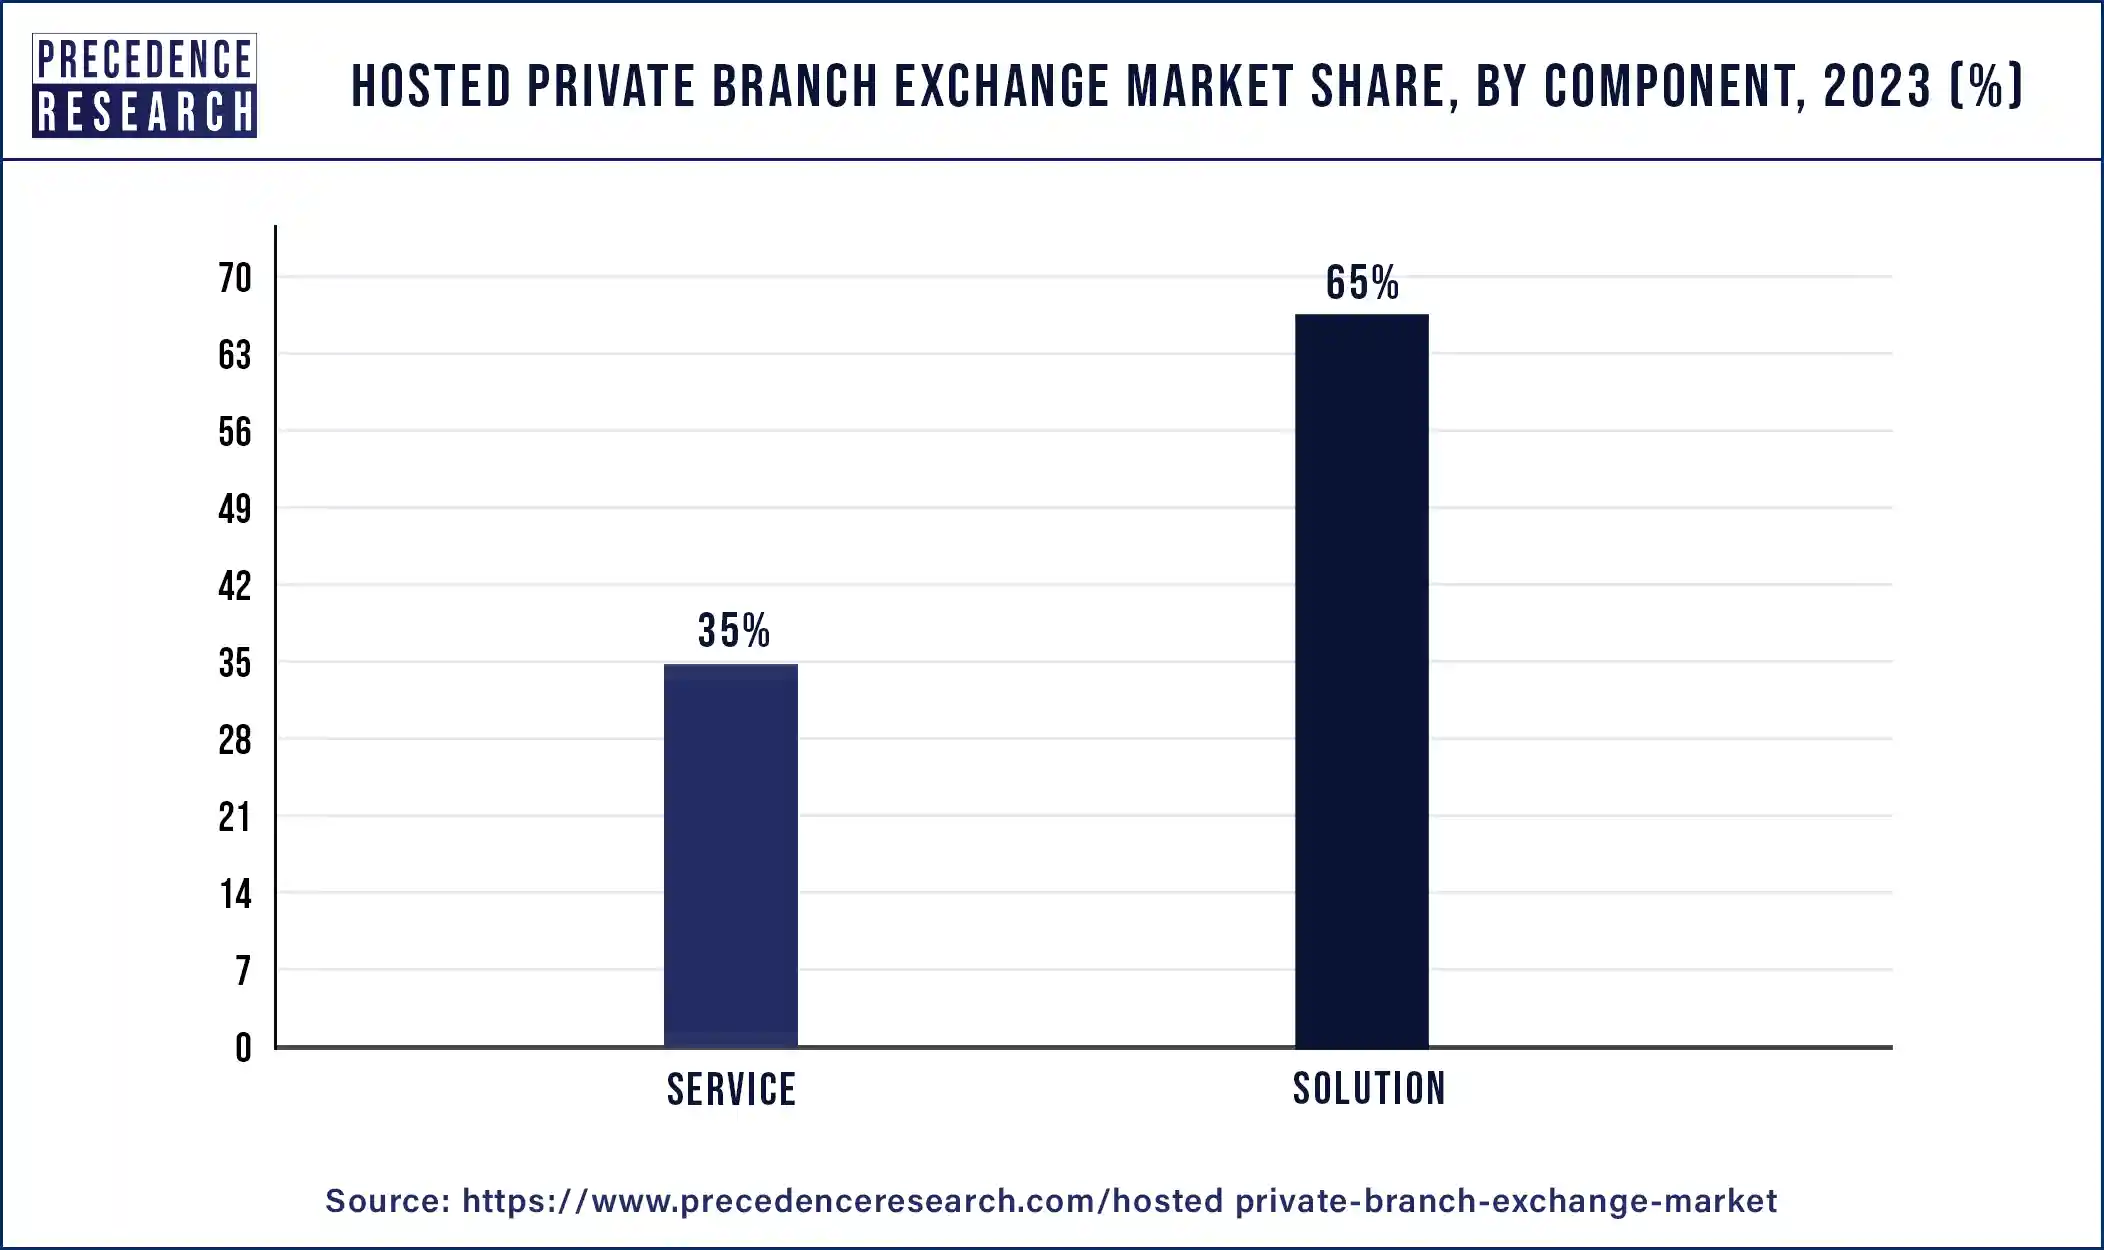 Hosted Private Branch Exchange Market Share, By Component, 2023 (%)